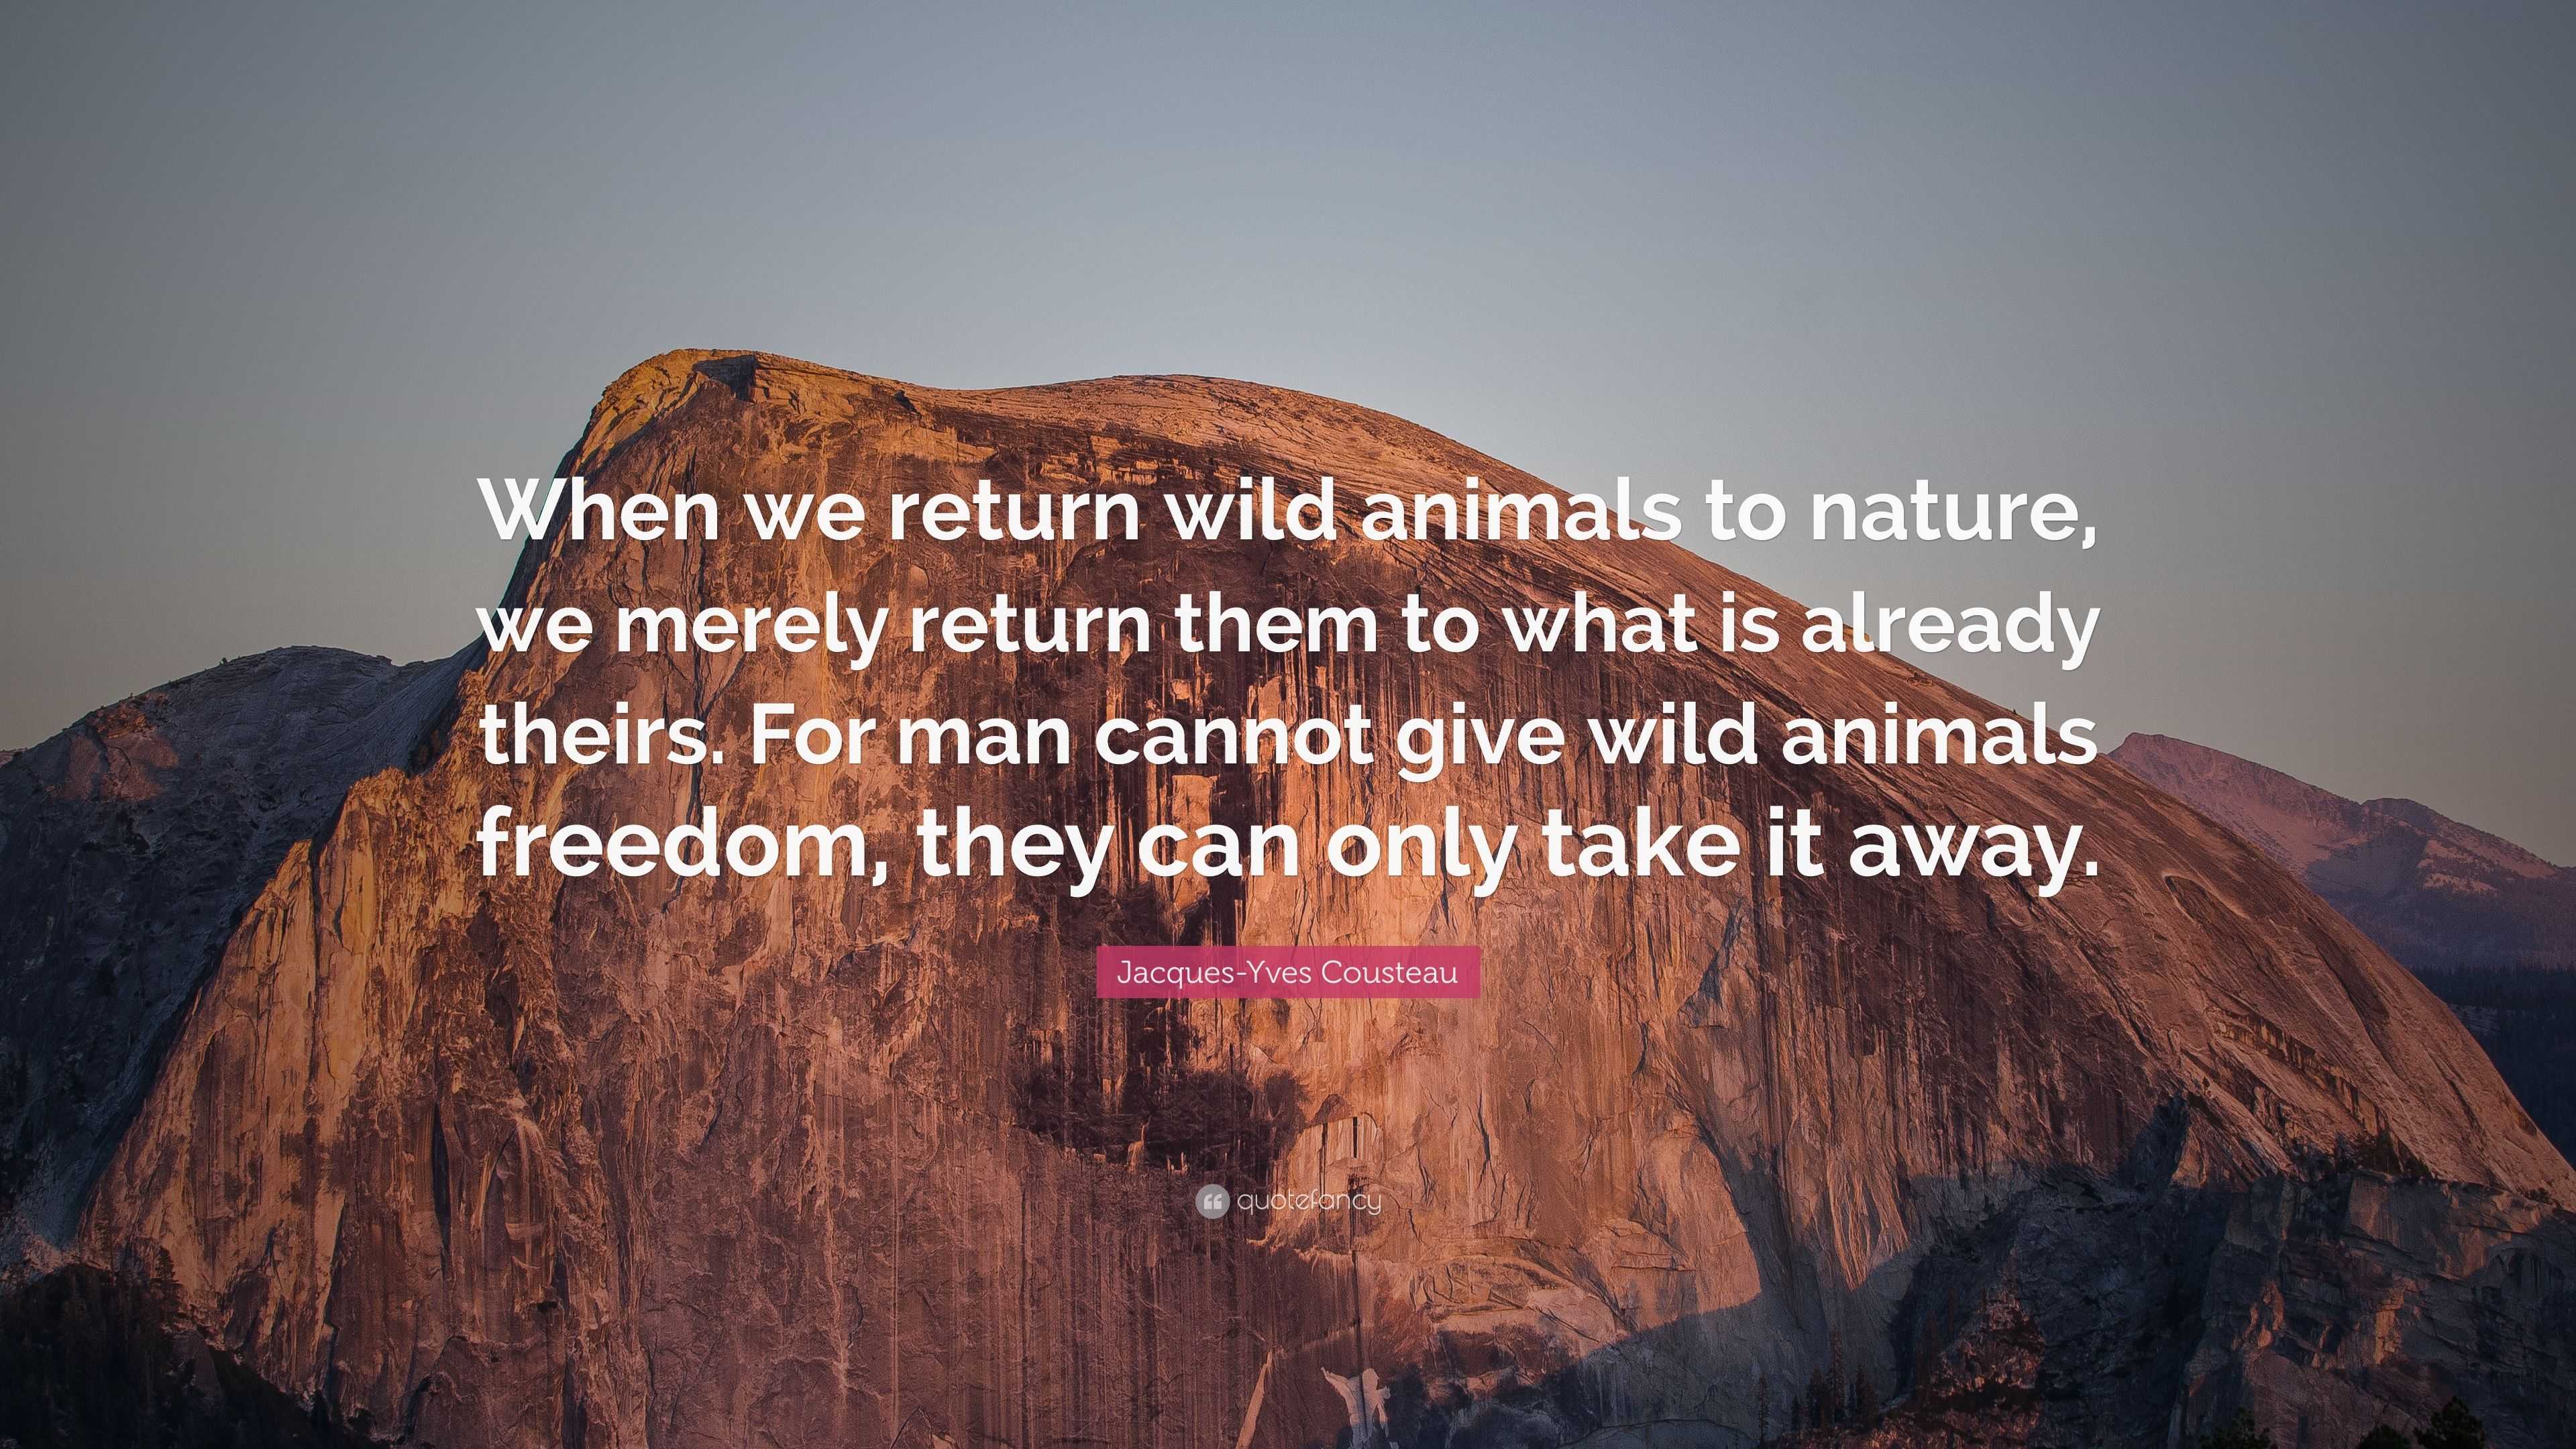 Jacques-Yves Cousteau Quote: “When we return wild animals to nature, we  merely return them to what is already theirs. For man cannot give wild  animals...”